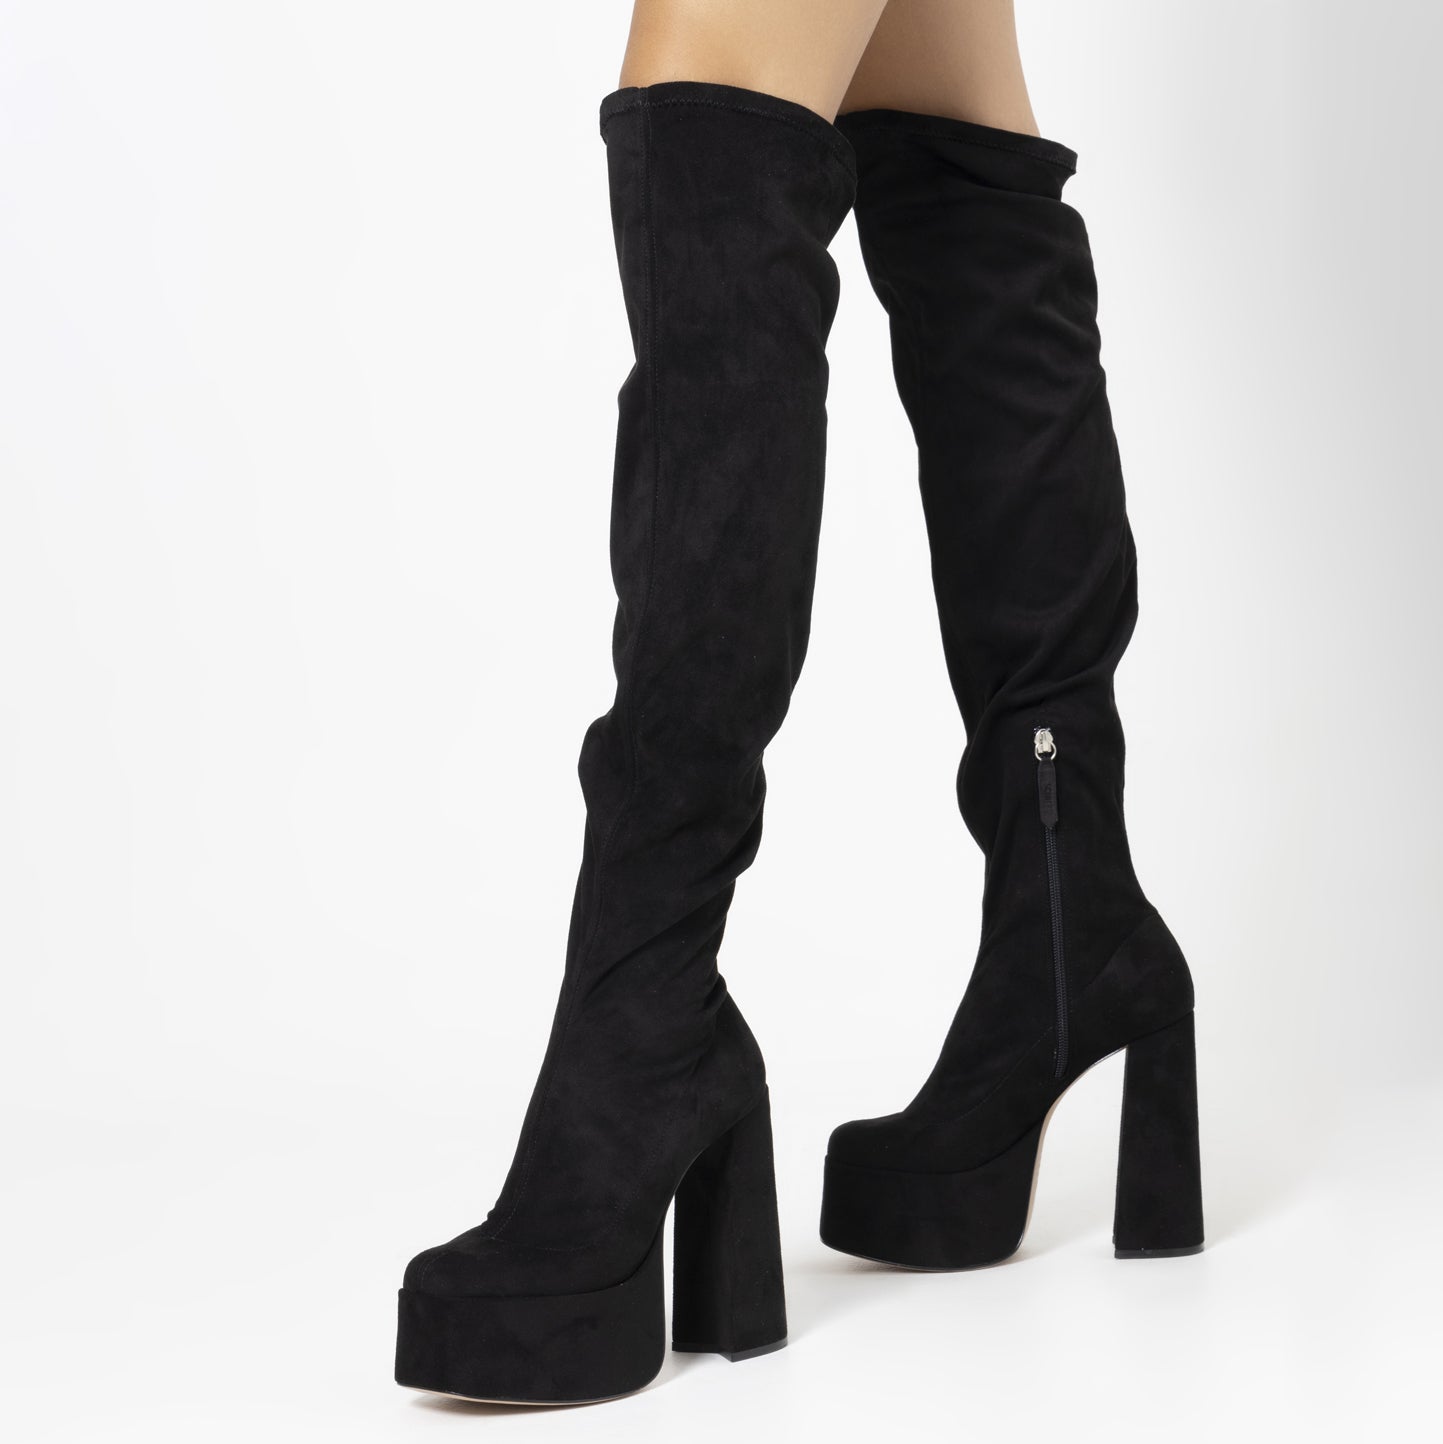 Women's Over-the-Knee Boots, South Africa